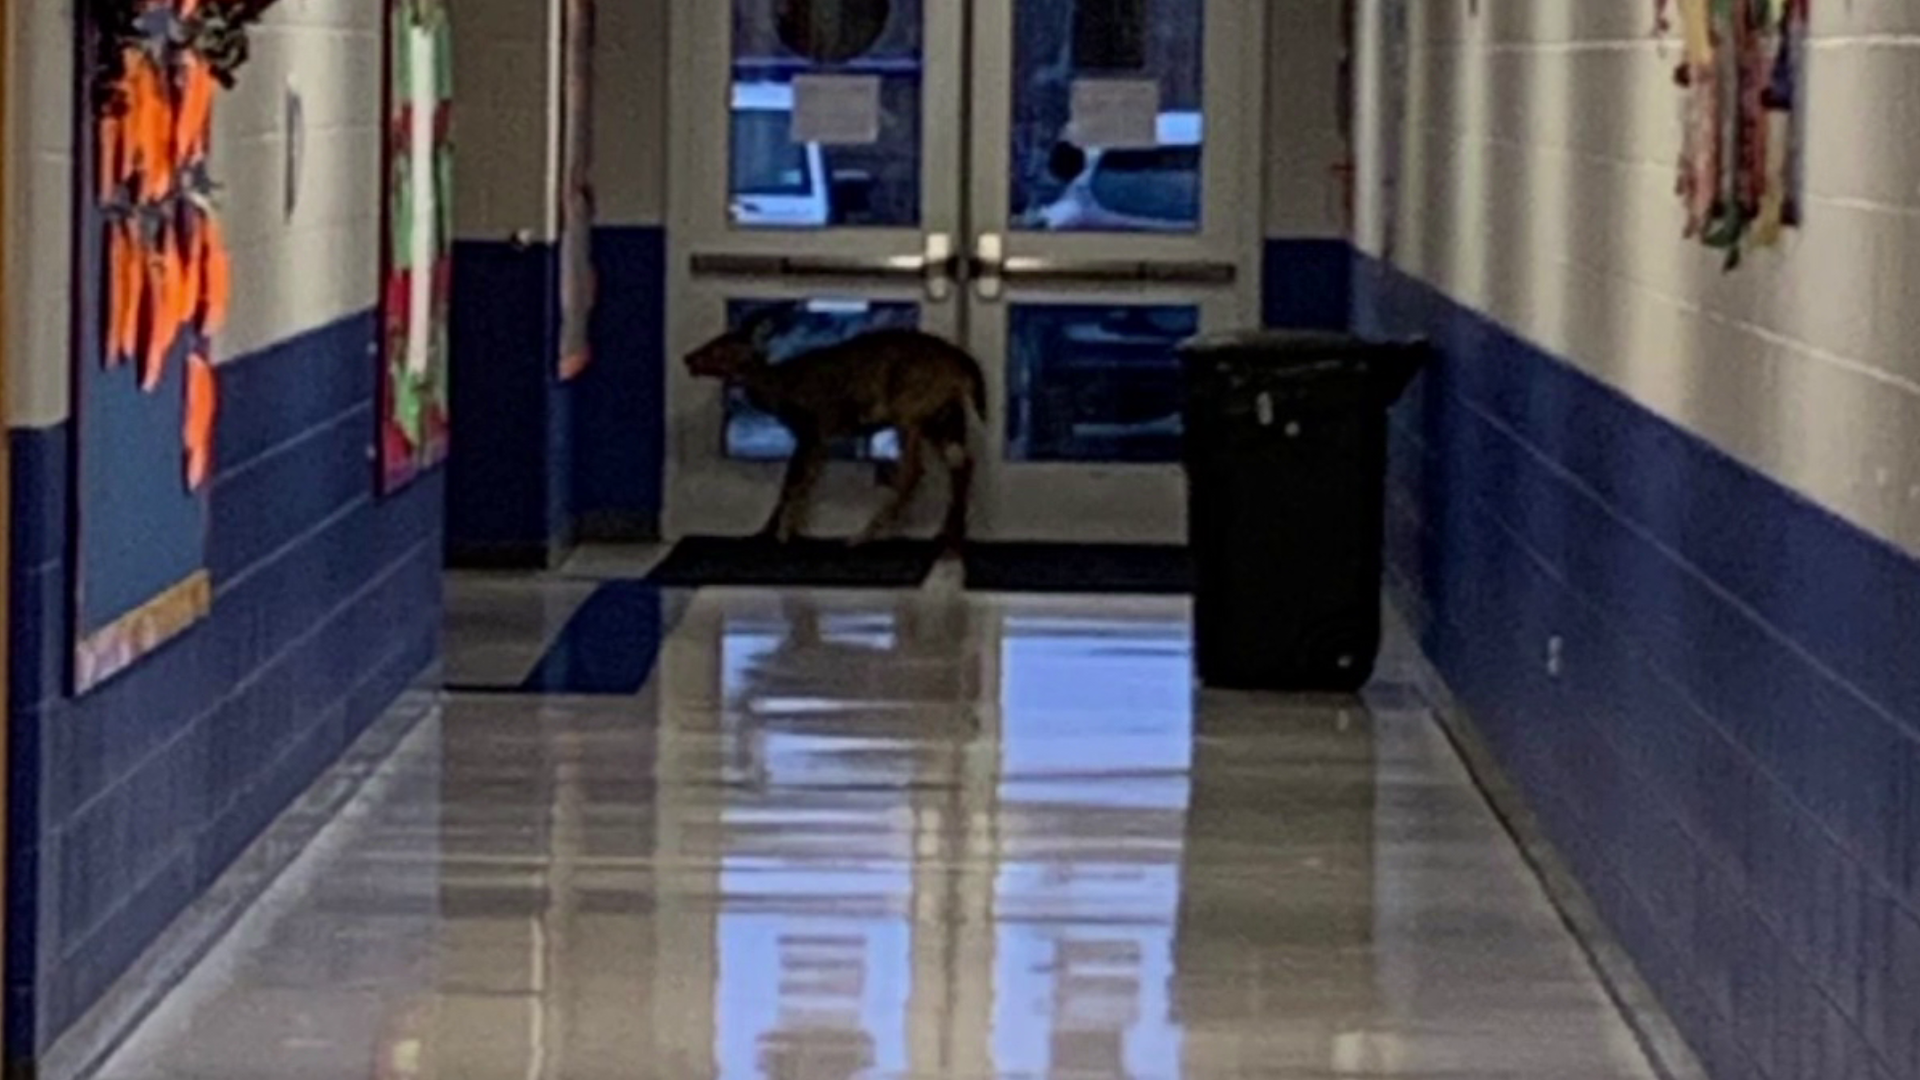 A deer made its way into North Schuylkill Elementary School this week. Friday, deer costumes were worn during the Halloween parade.